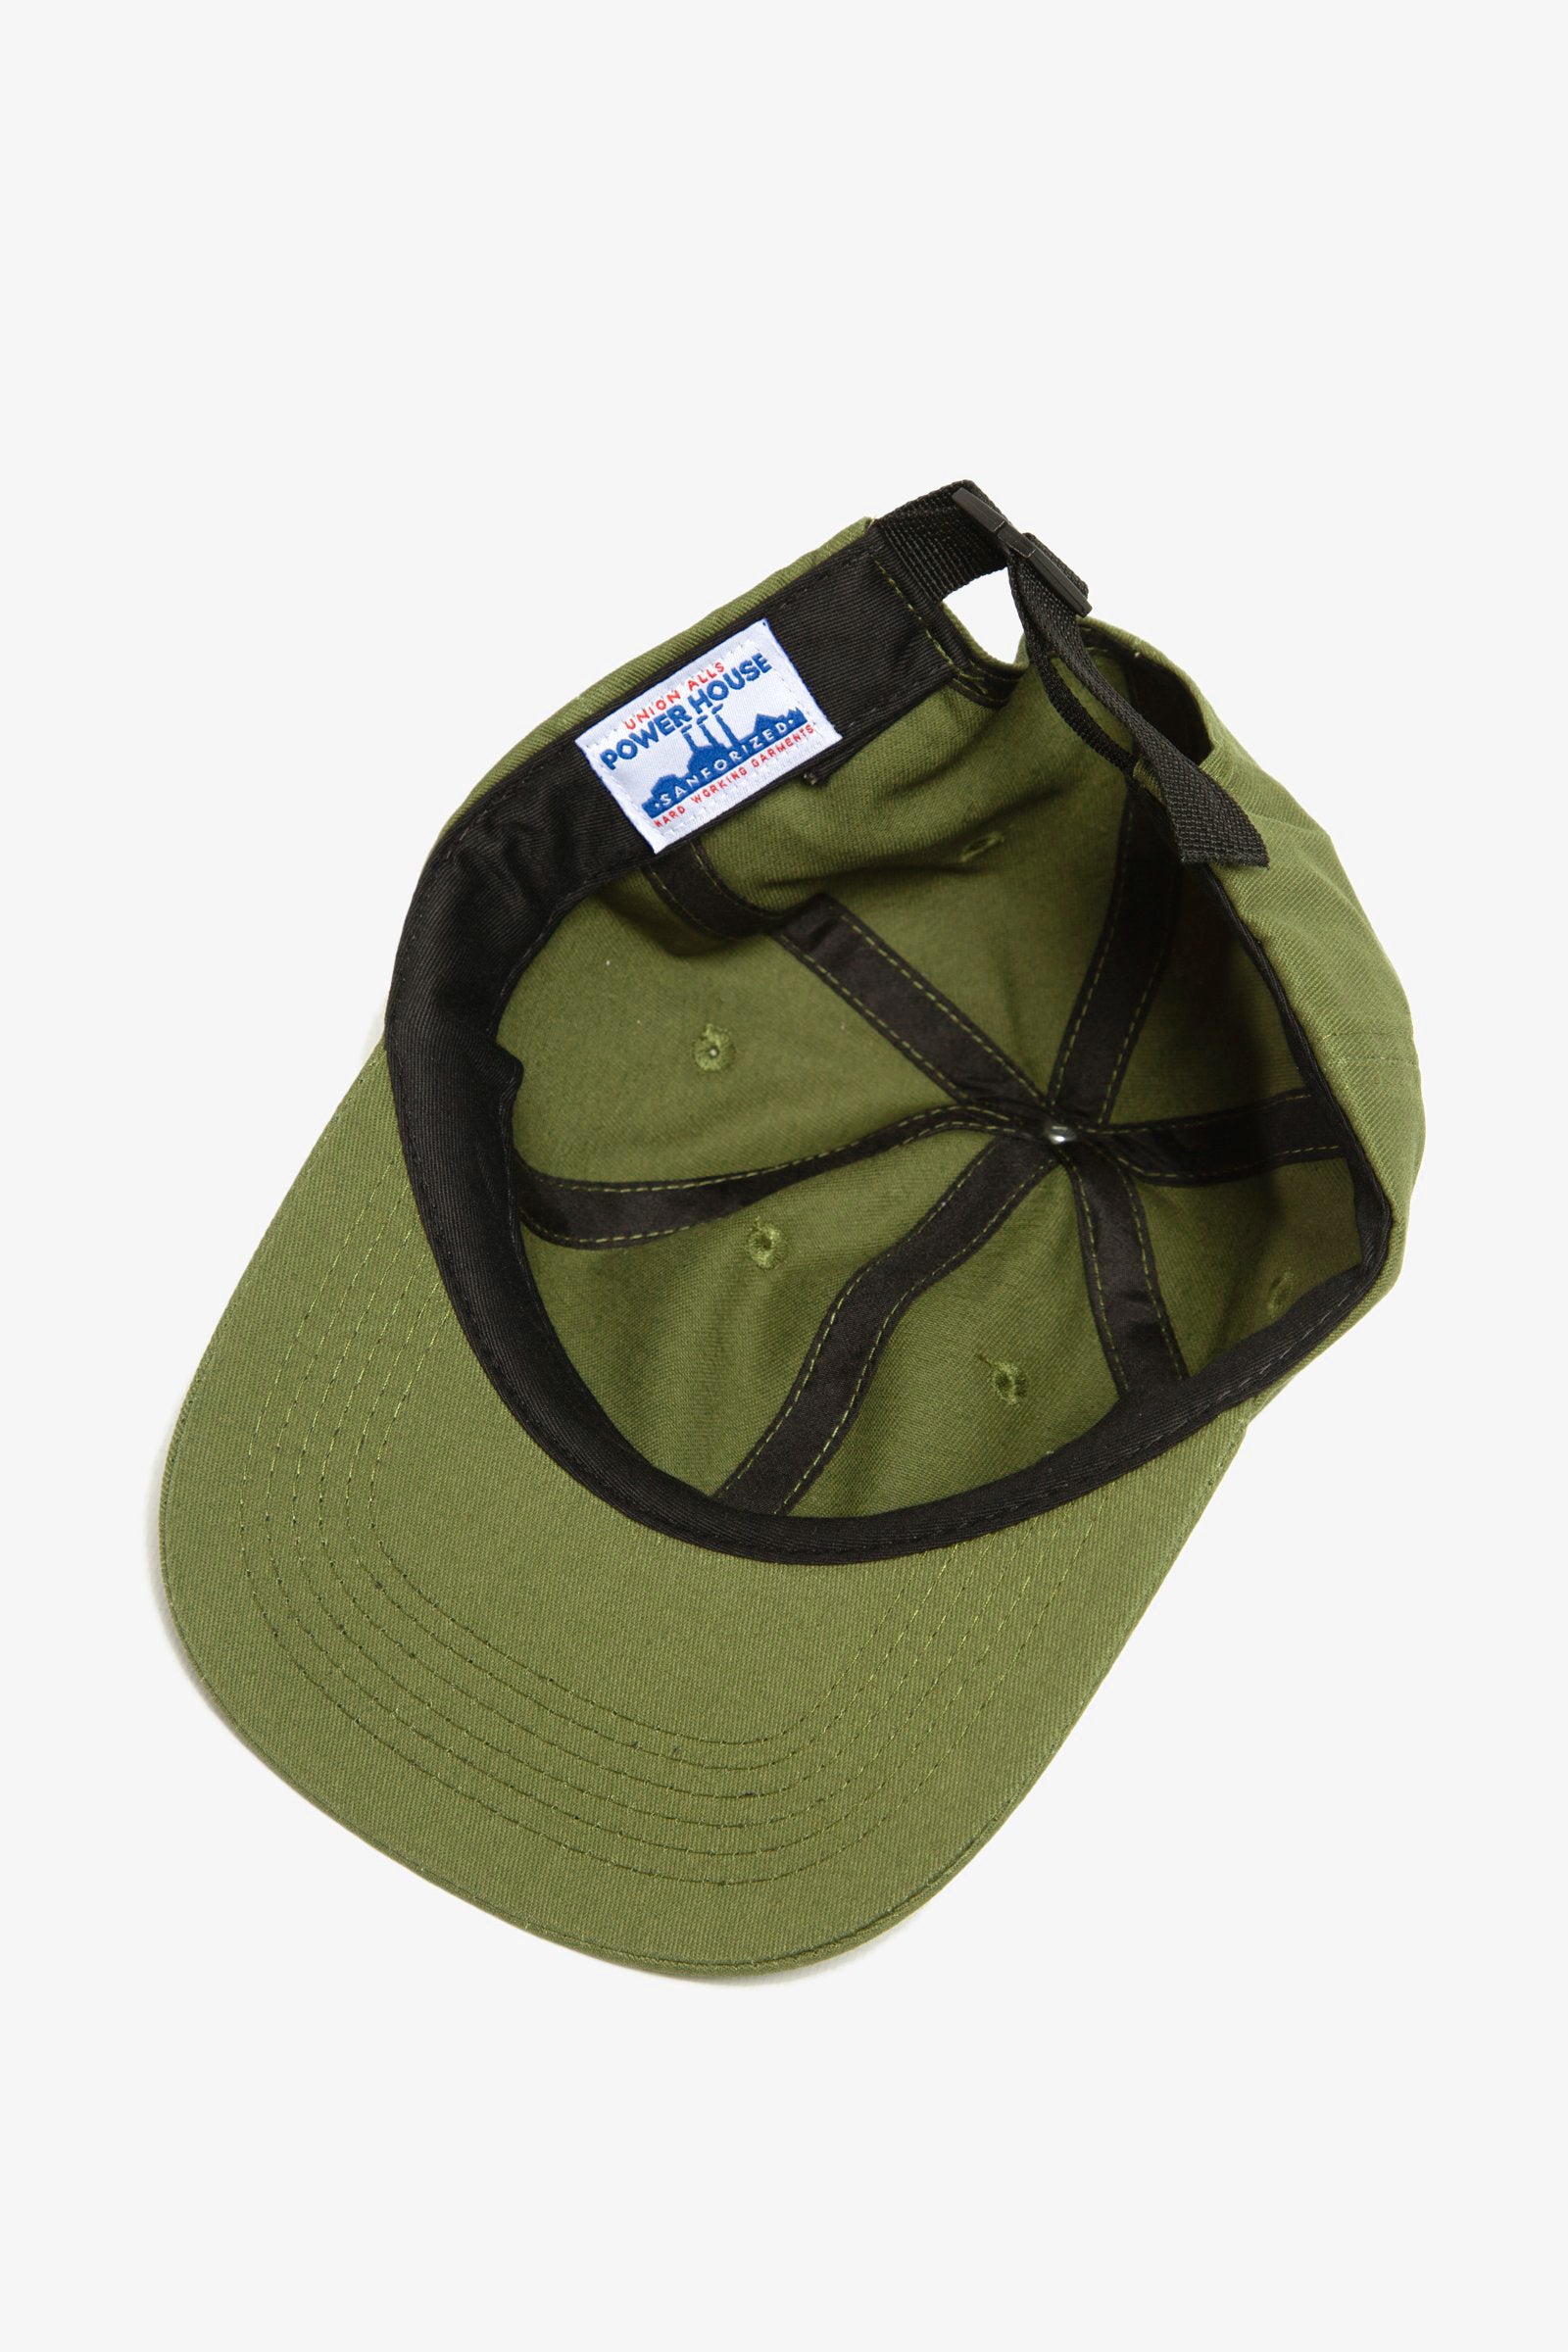 Power House - Perfect 6-Panel Cap - Olive